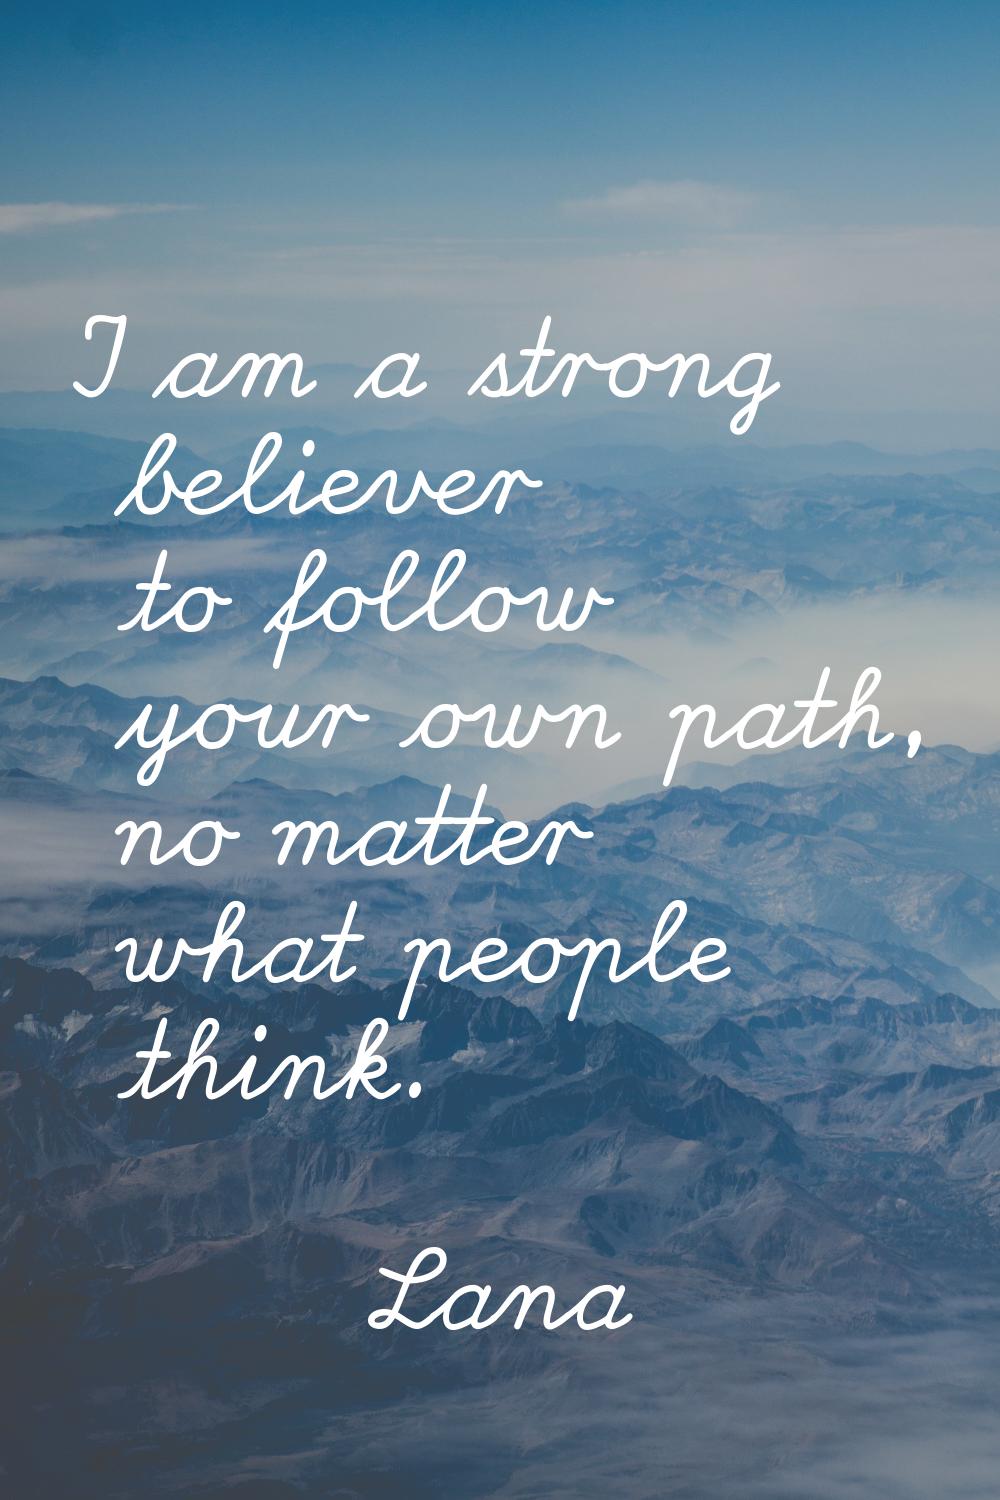 I am a strong believer to follow your own path, no matter what people think.